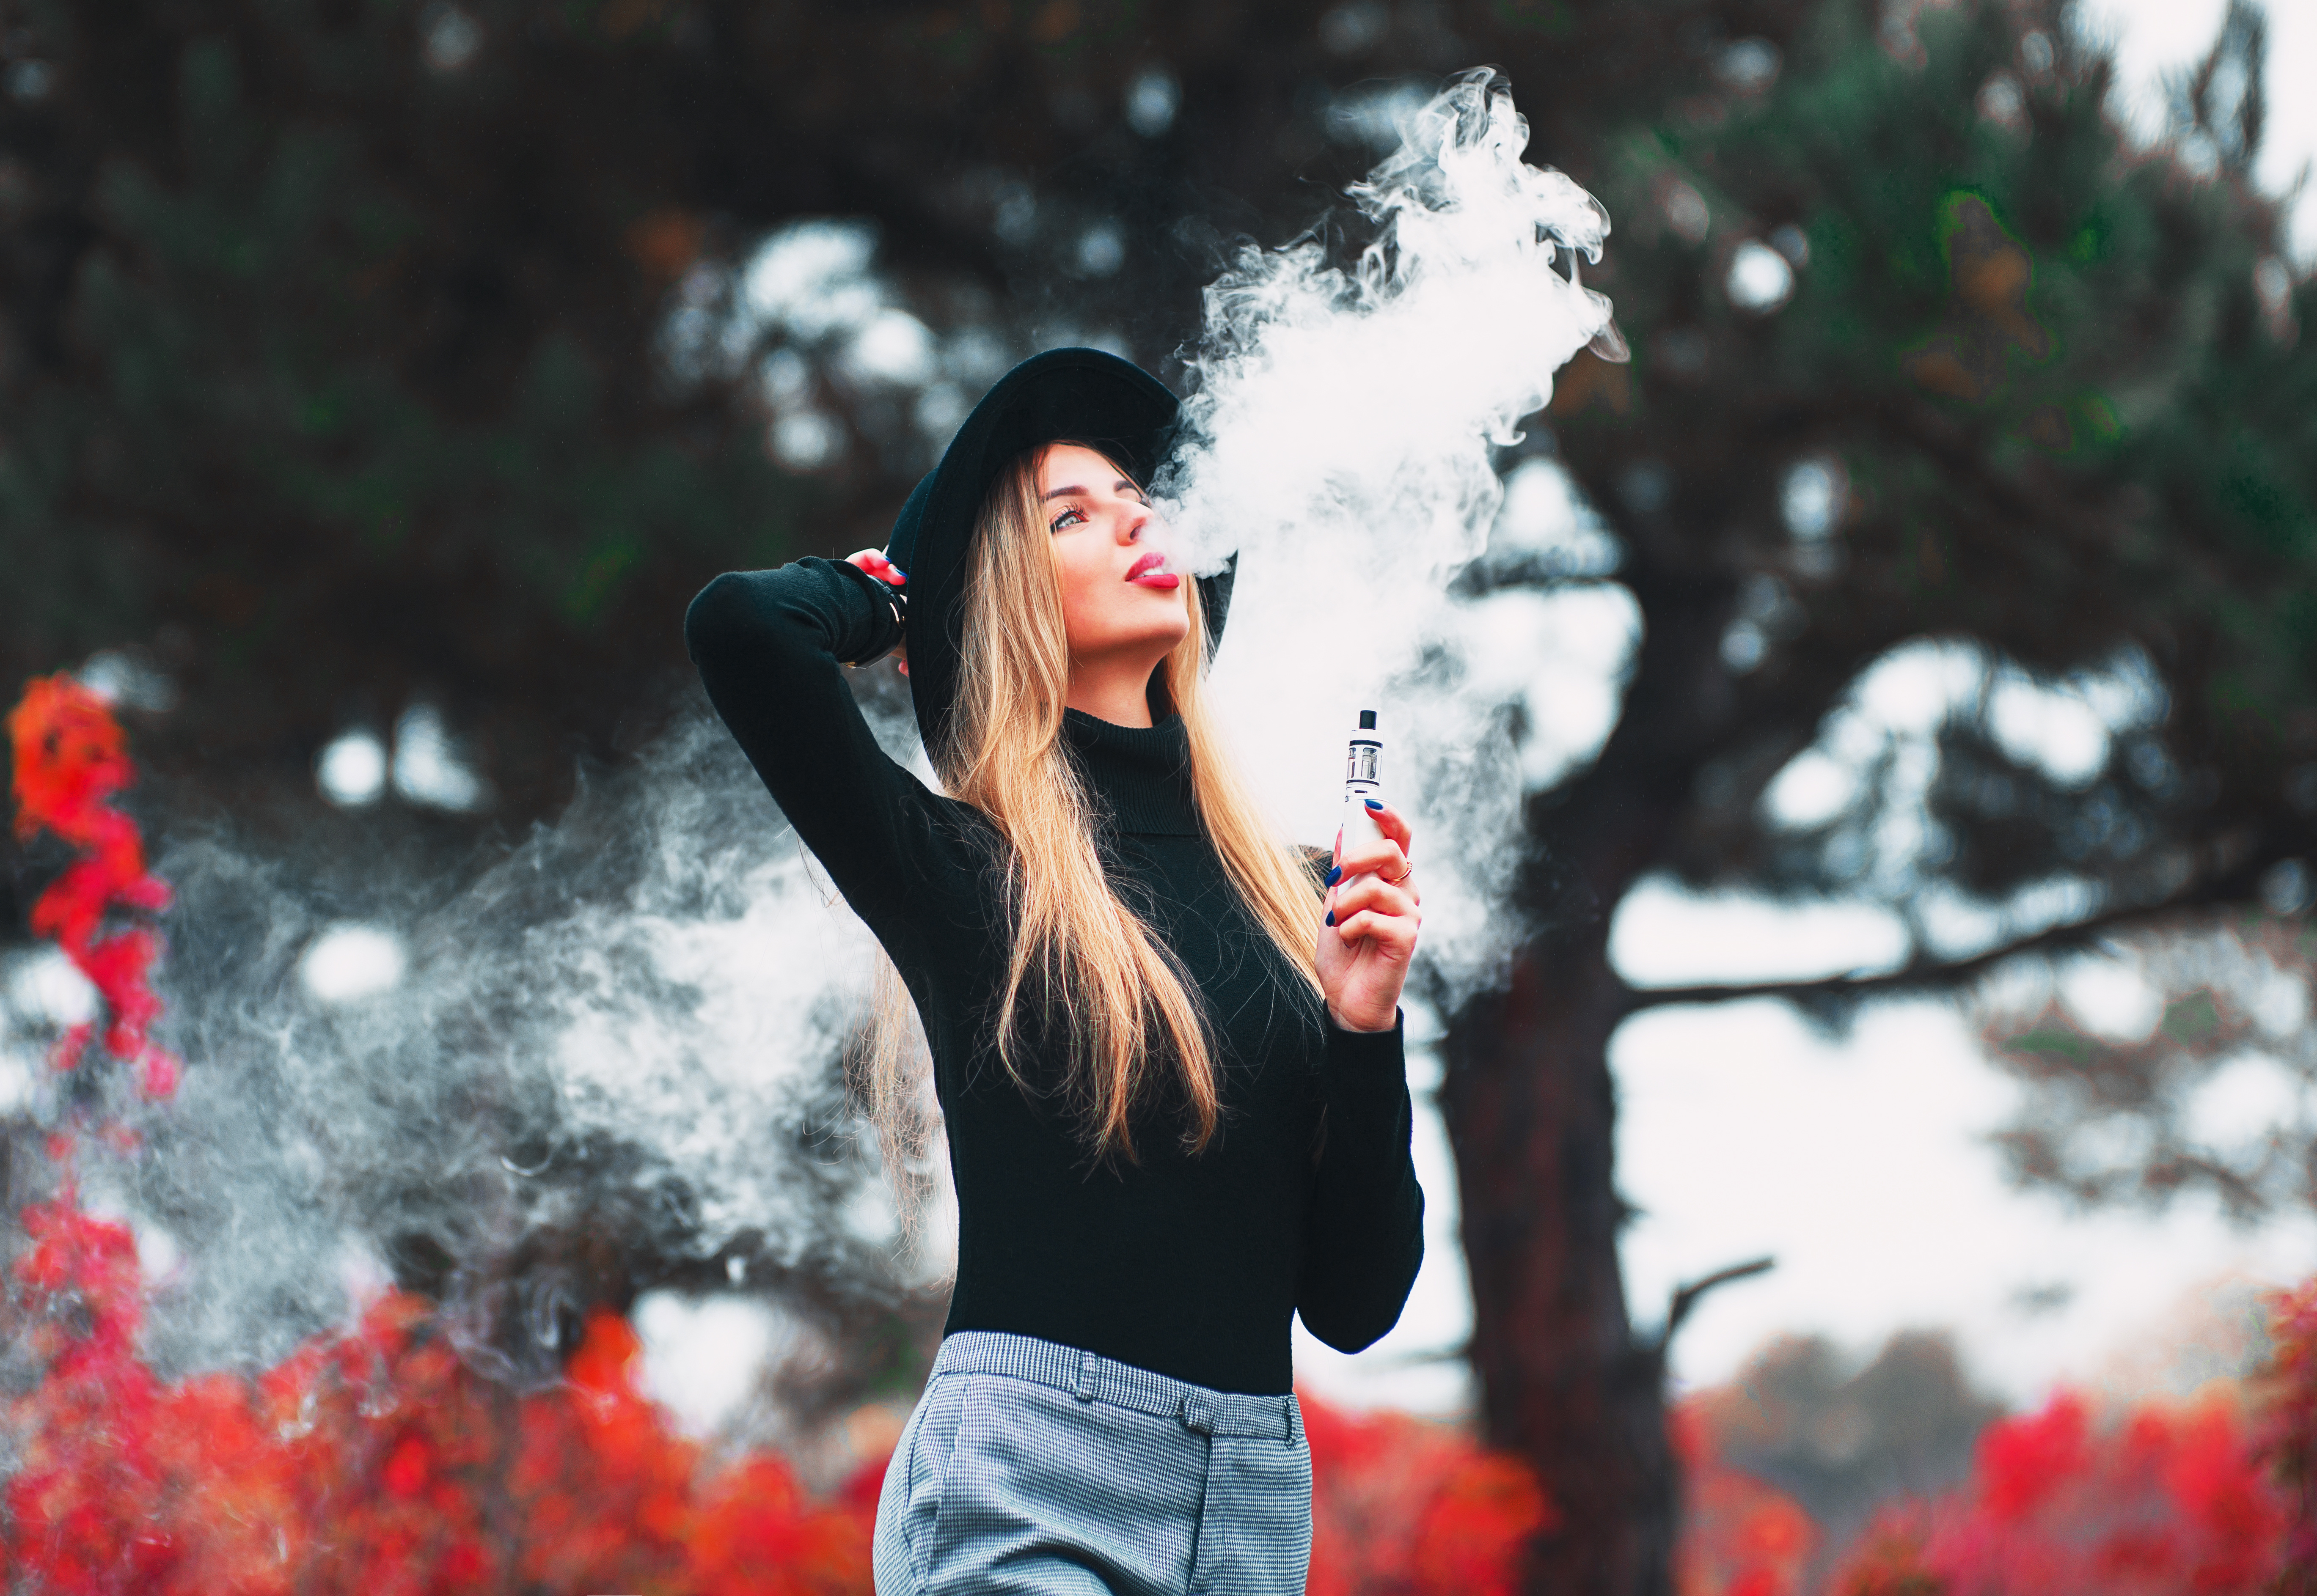 Clearing the Air: Facts About Vaping-Related Illness